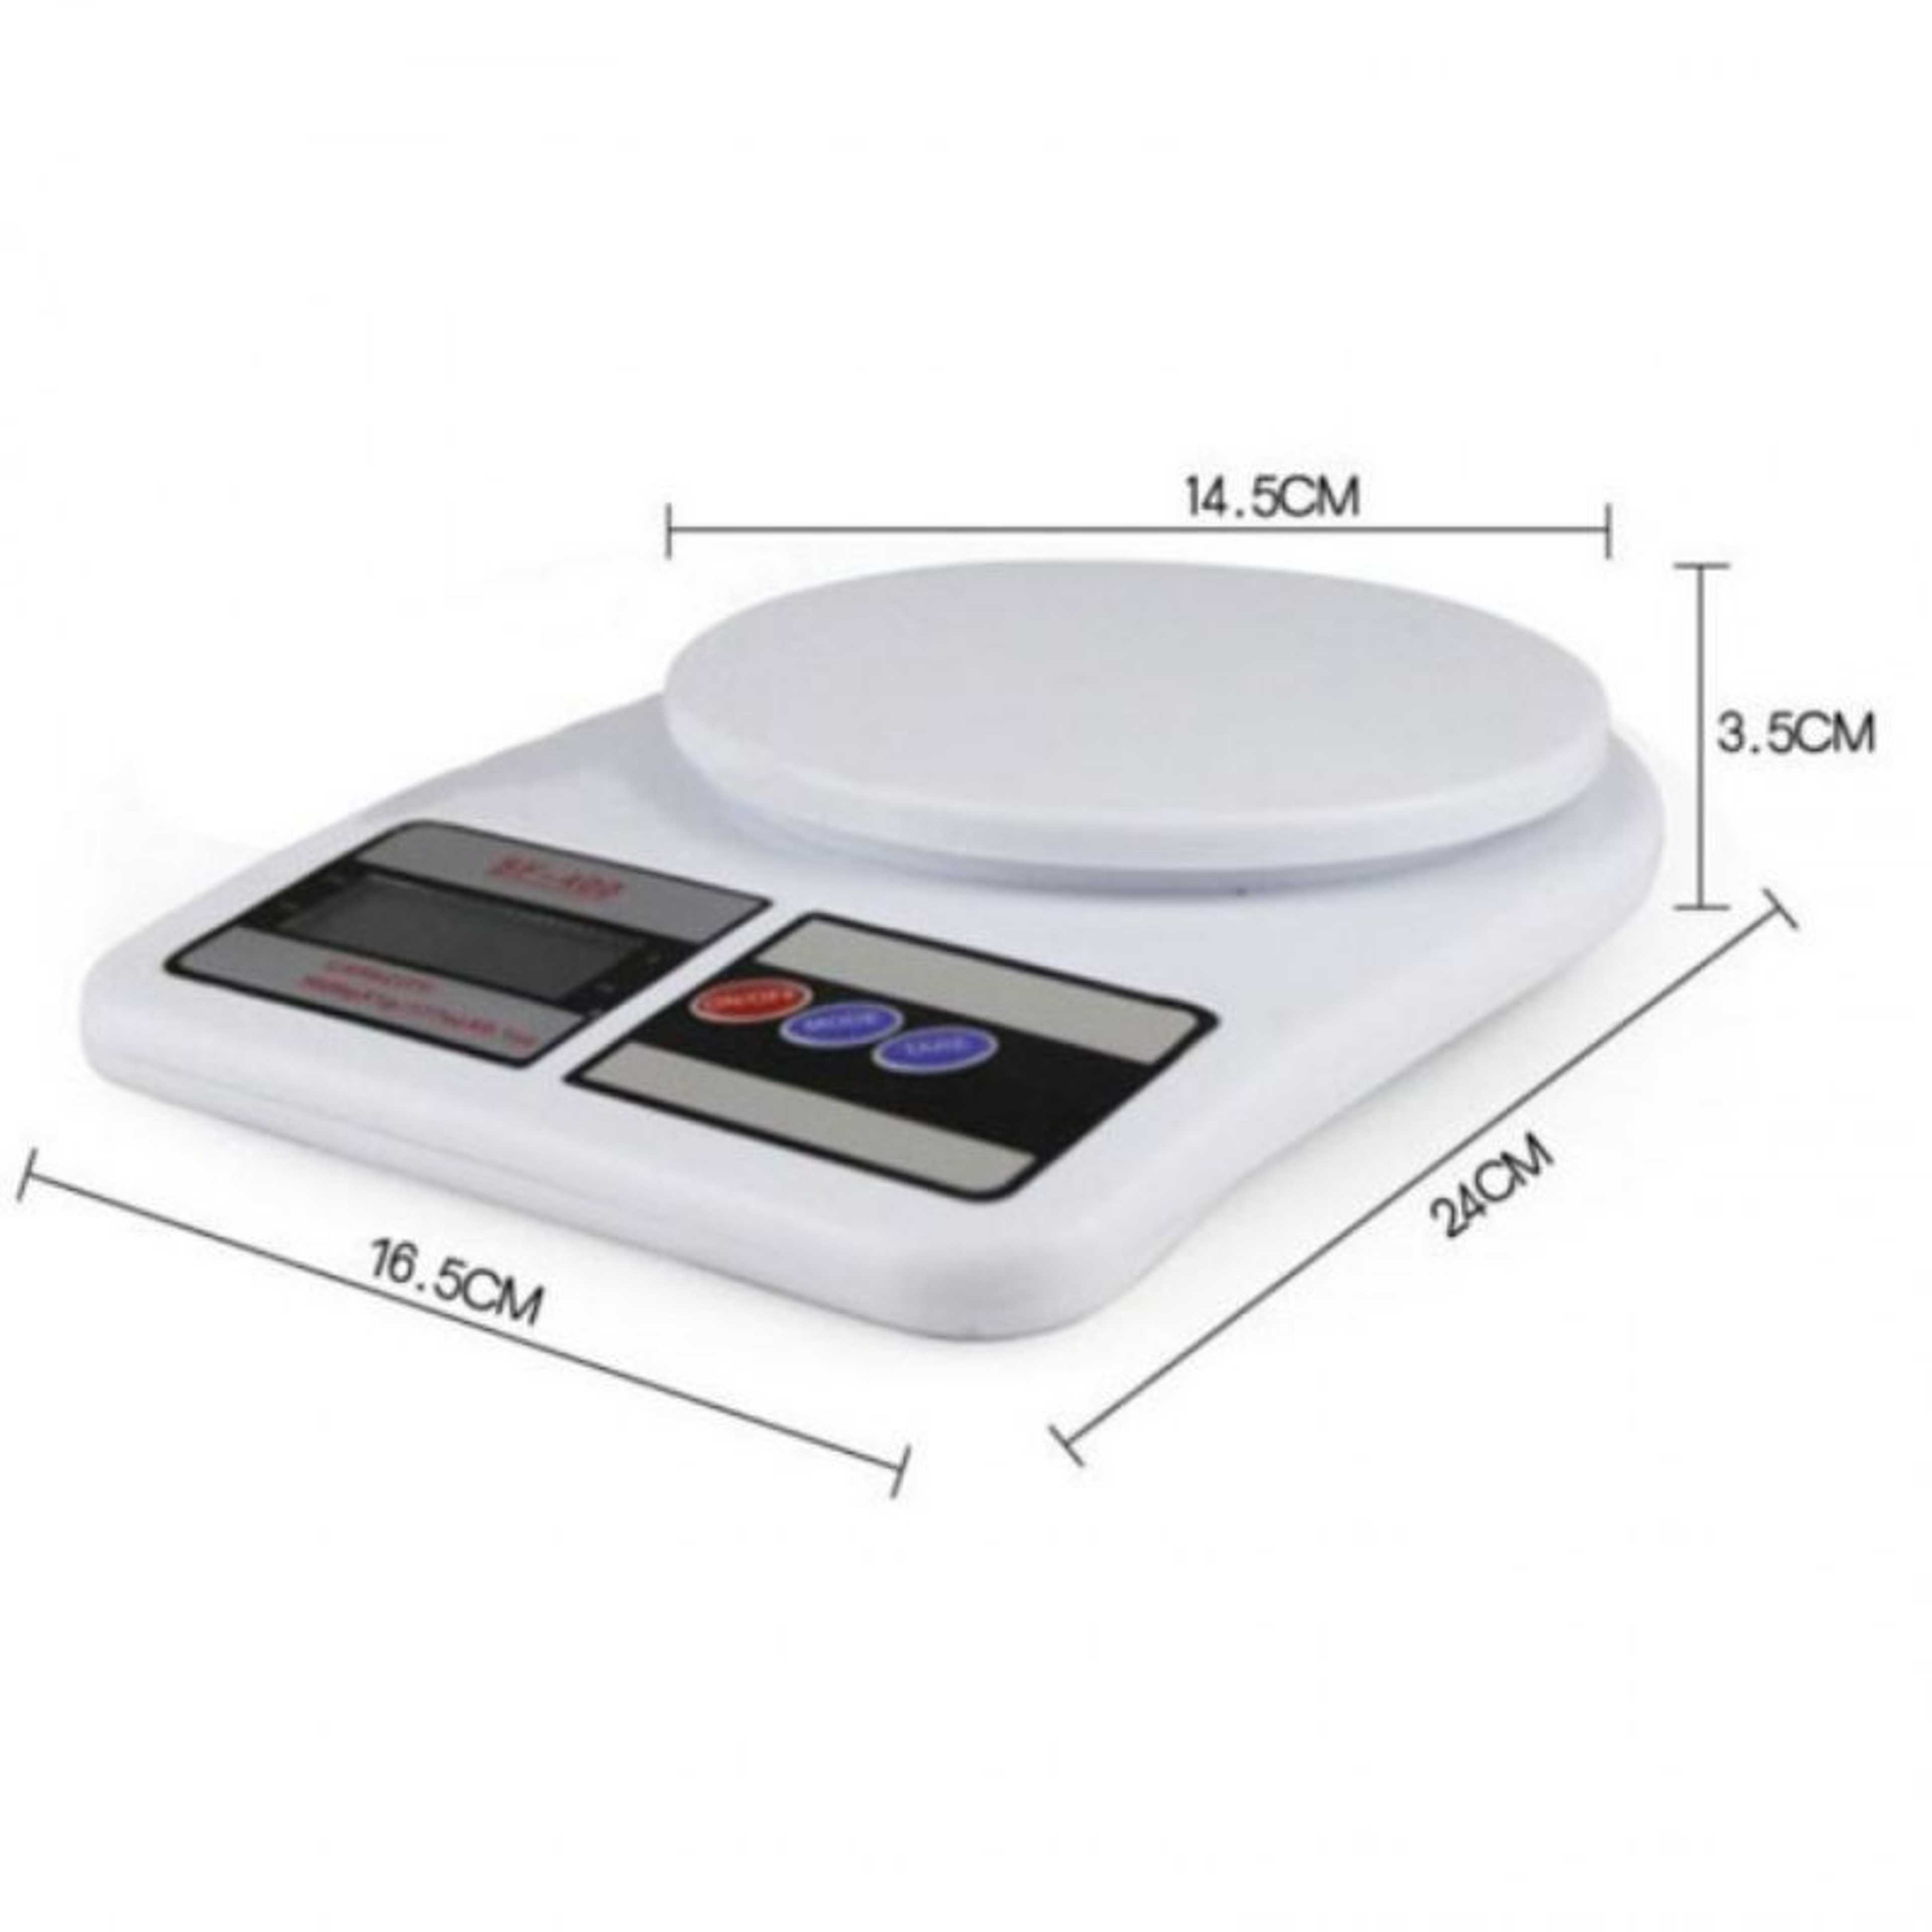 Kitchen Scale Electronic For Weighing Spices, Flour, Dough, Fruits